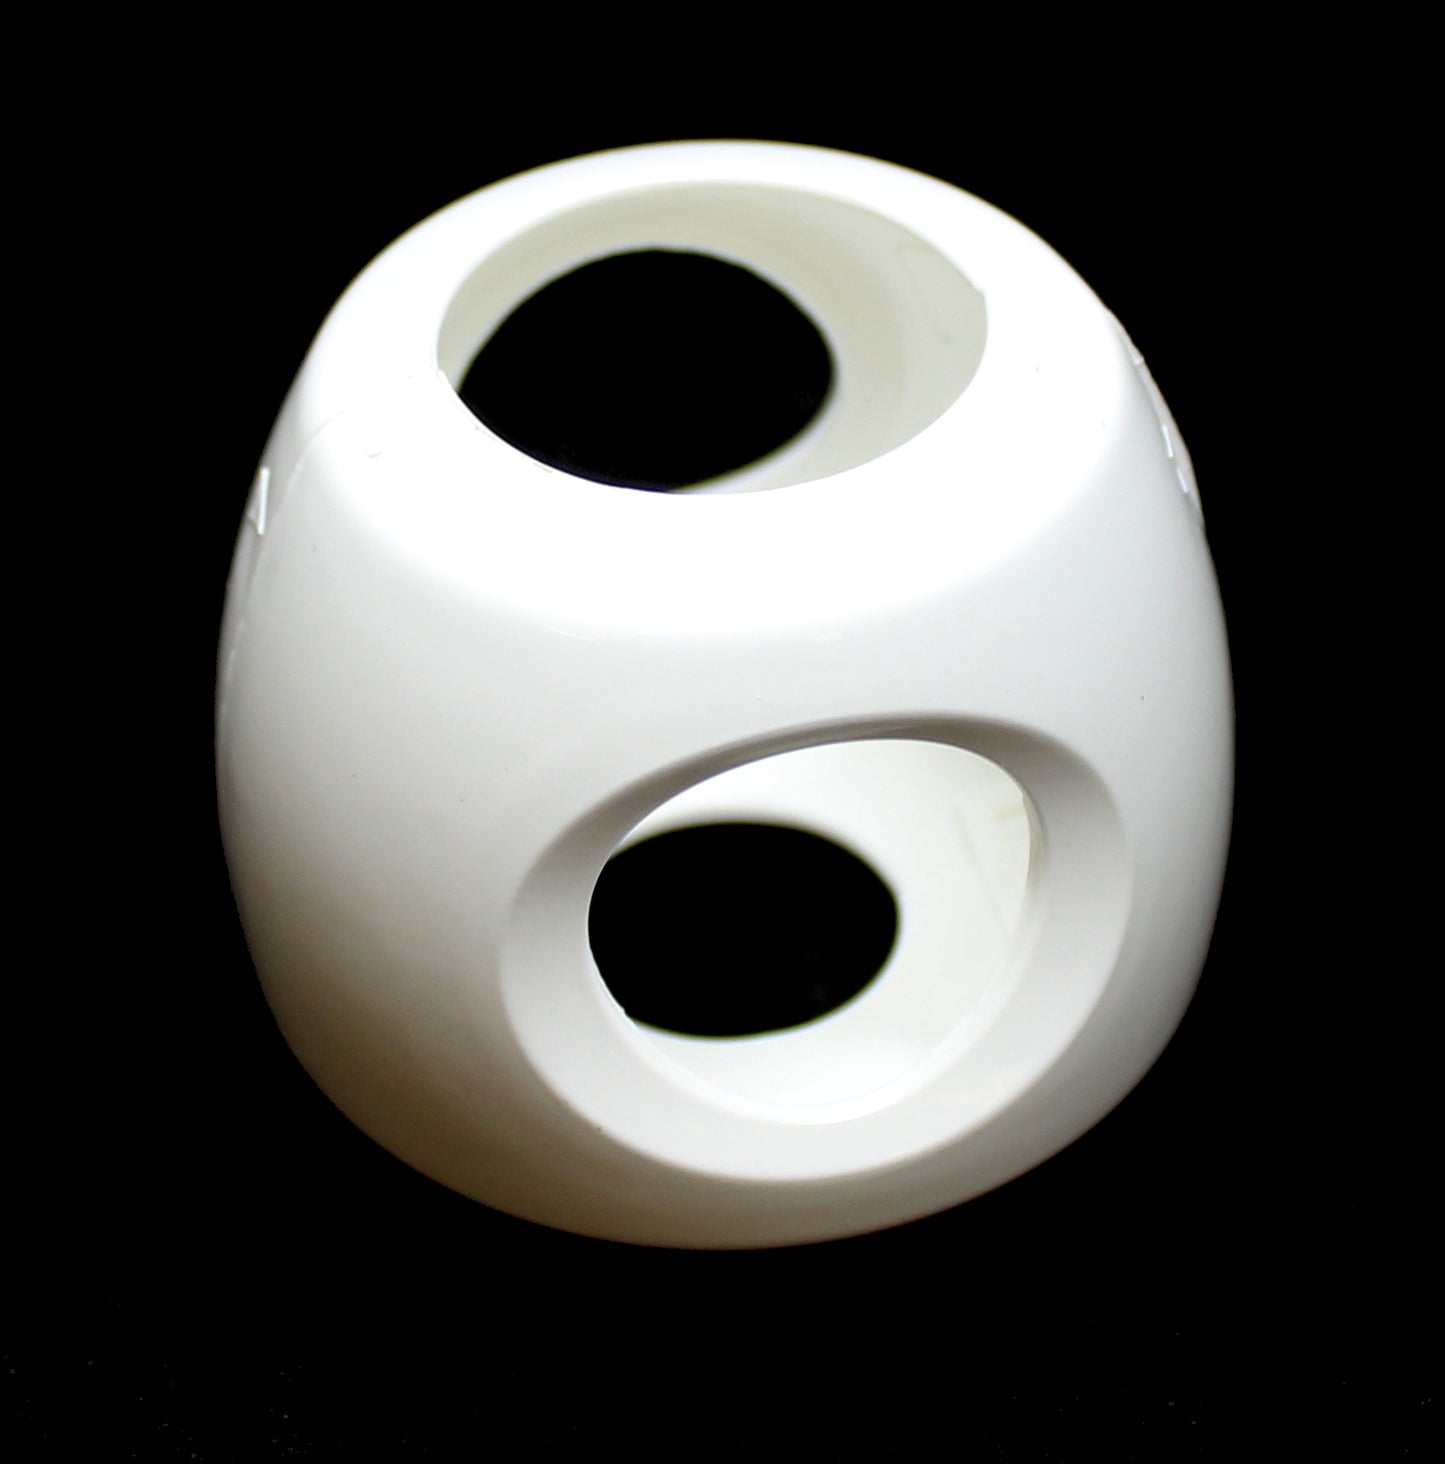 White Safety Doorknob Covers - Child Proof Door Knob Covers